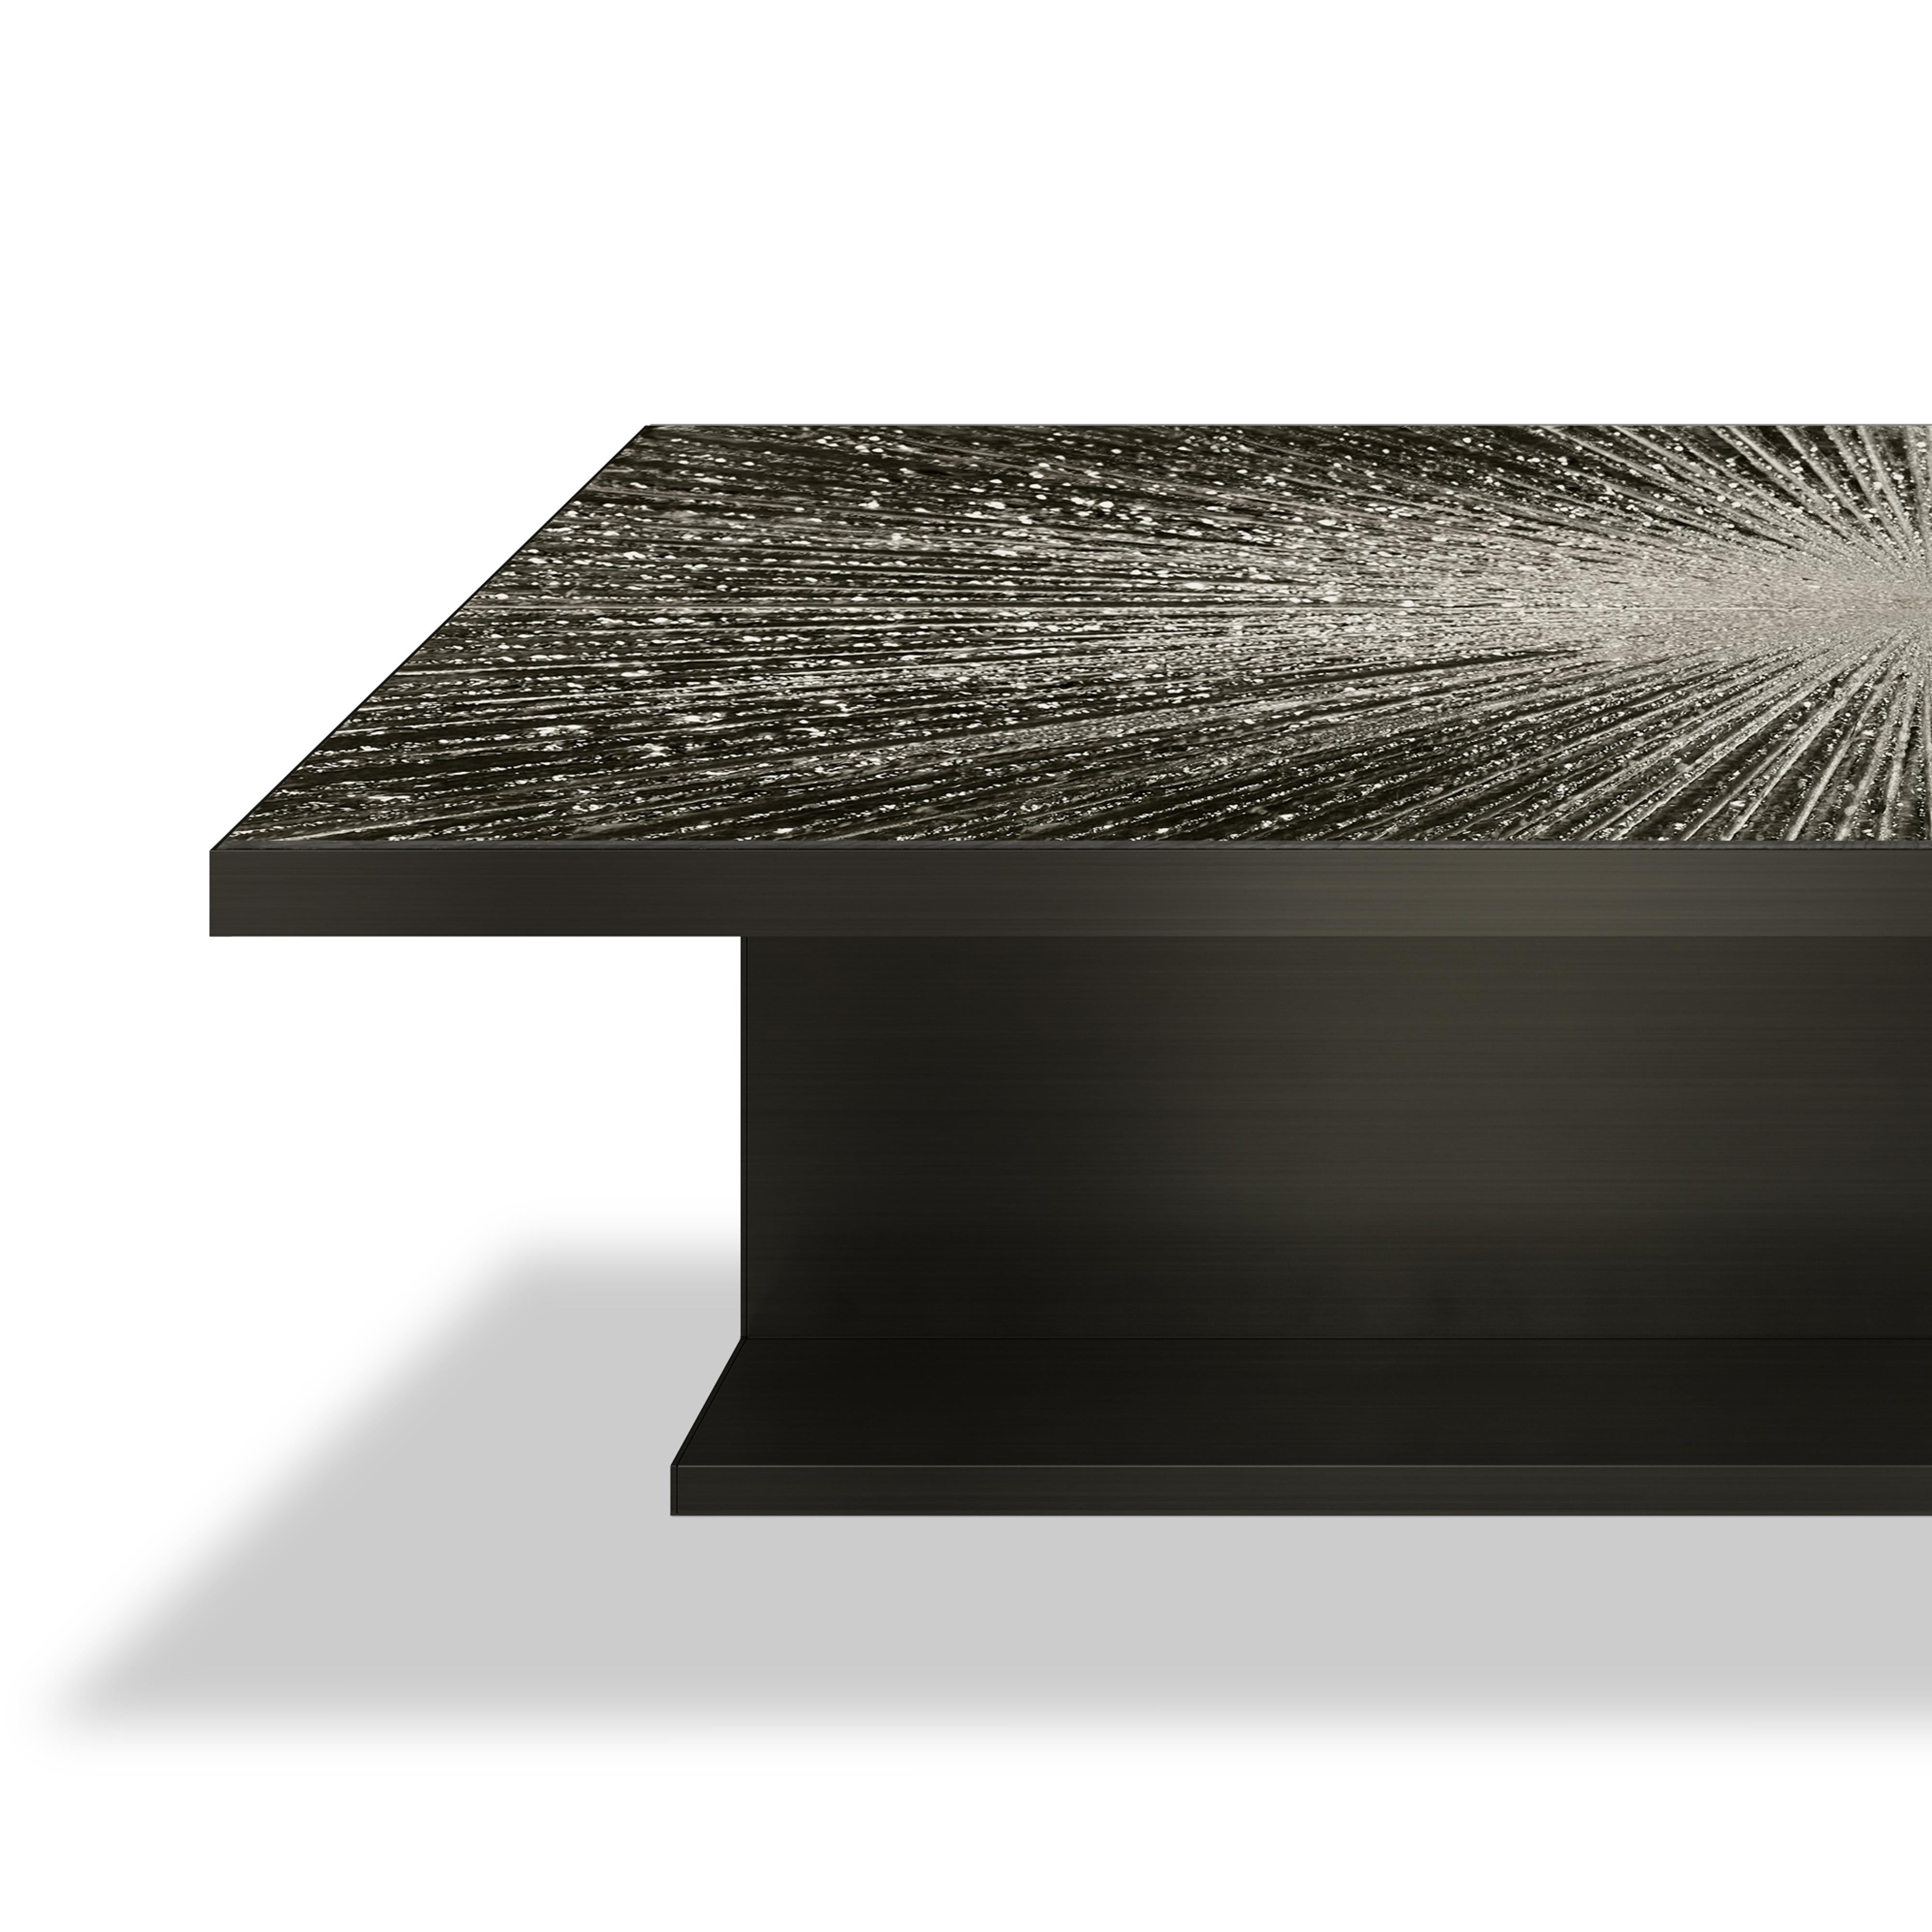 Lillian Gorbachincky's Signature Limited Edition GALA dining table with starburst art glass top and bronze base designed and fabricated by Lillian Gorbachicnky Atelier.

Overall dimensions: 96